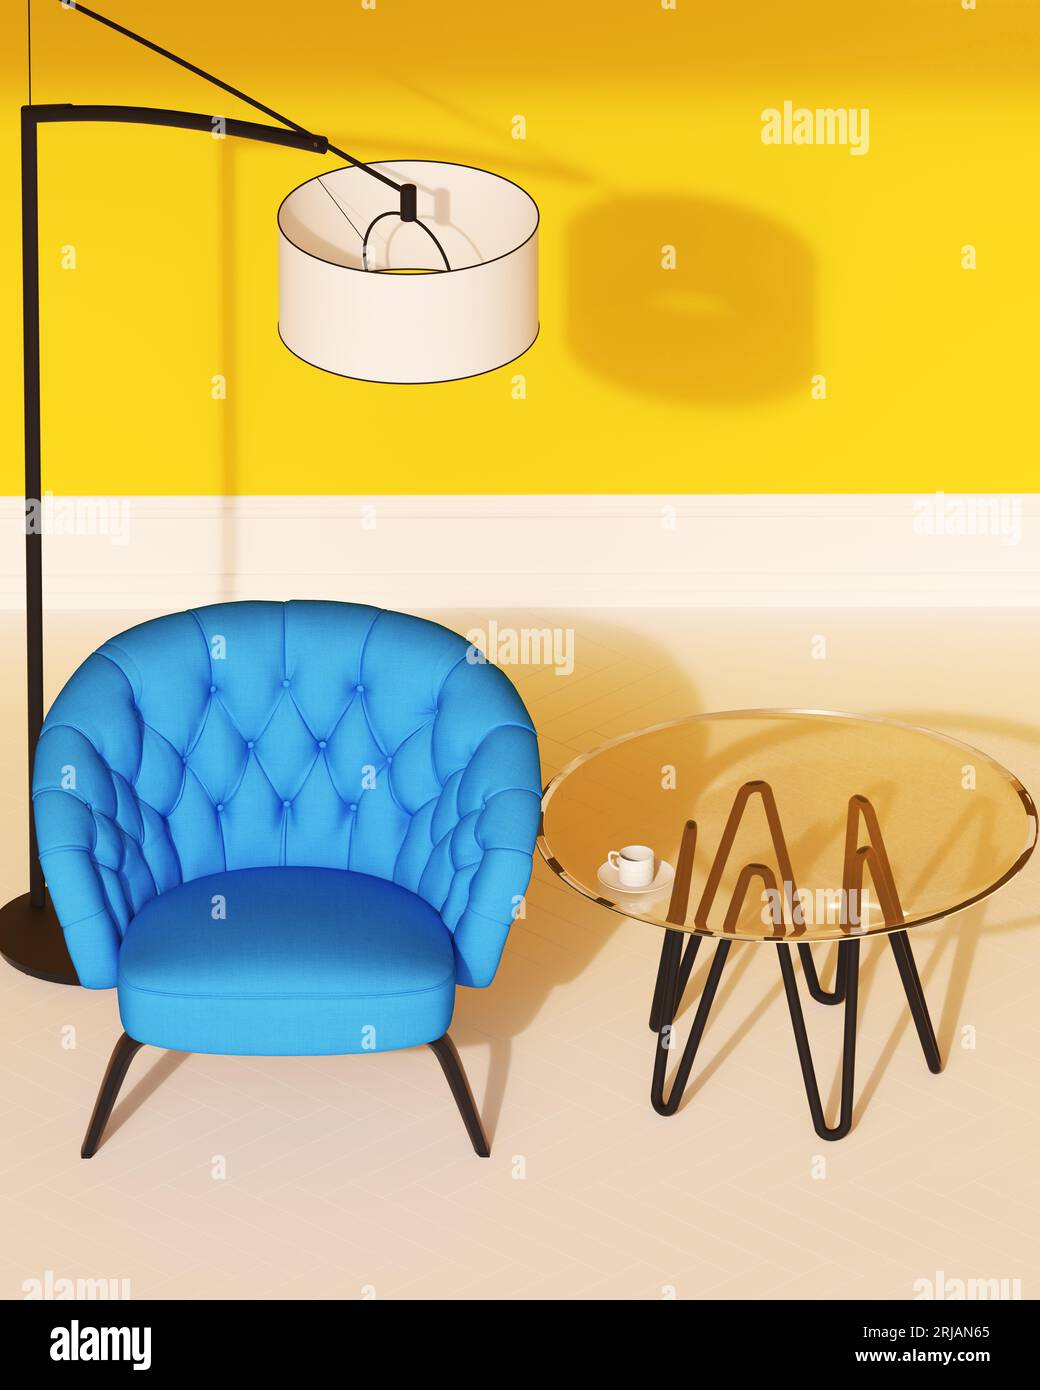 Comfy armchair blue and yellow decor glass table over hang lamp retro living 1950s vintage sunlight 3d illustration render digital rendering Stock Photo